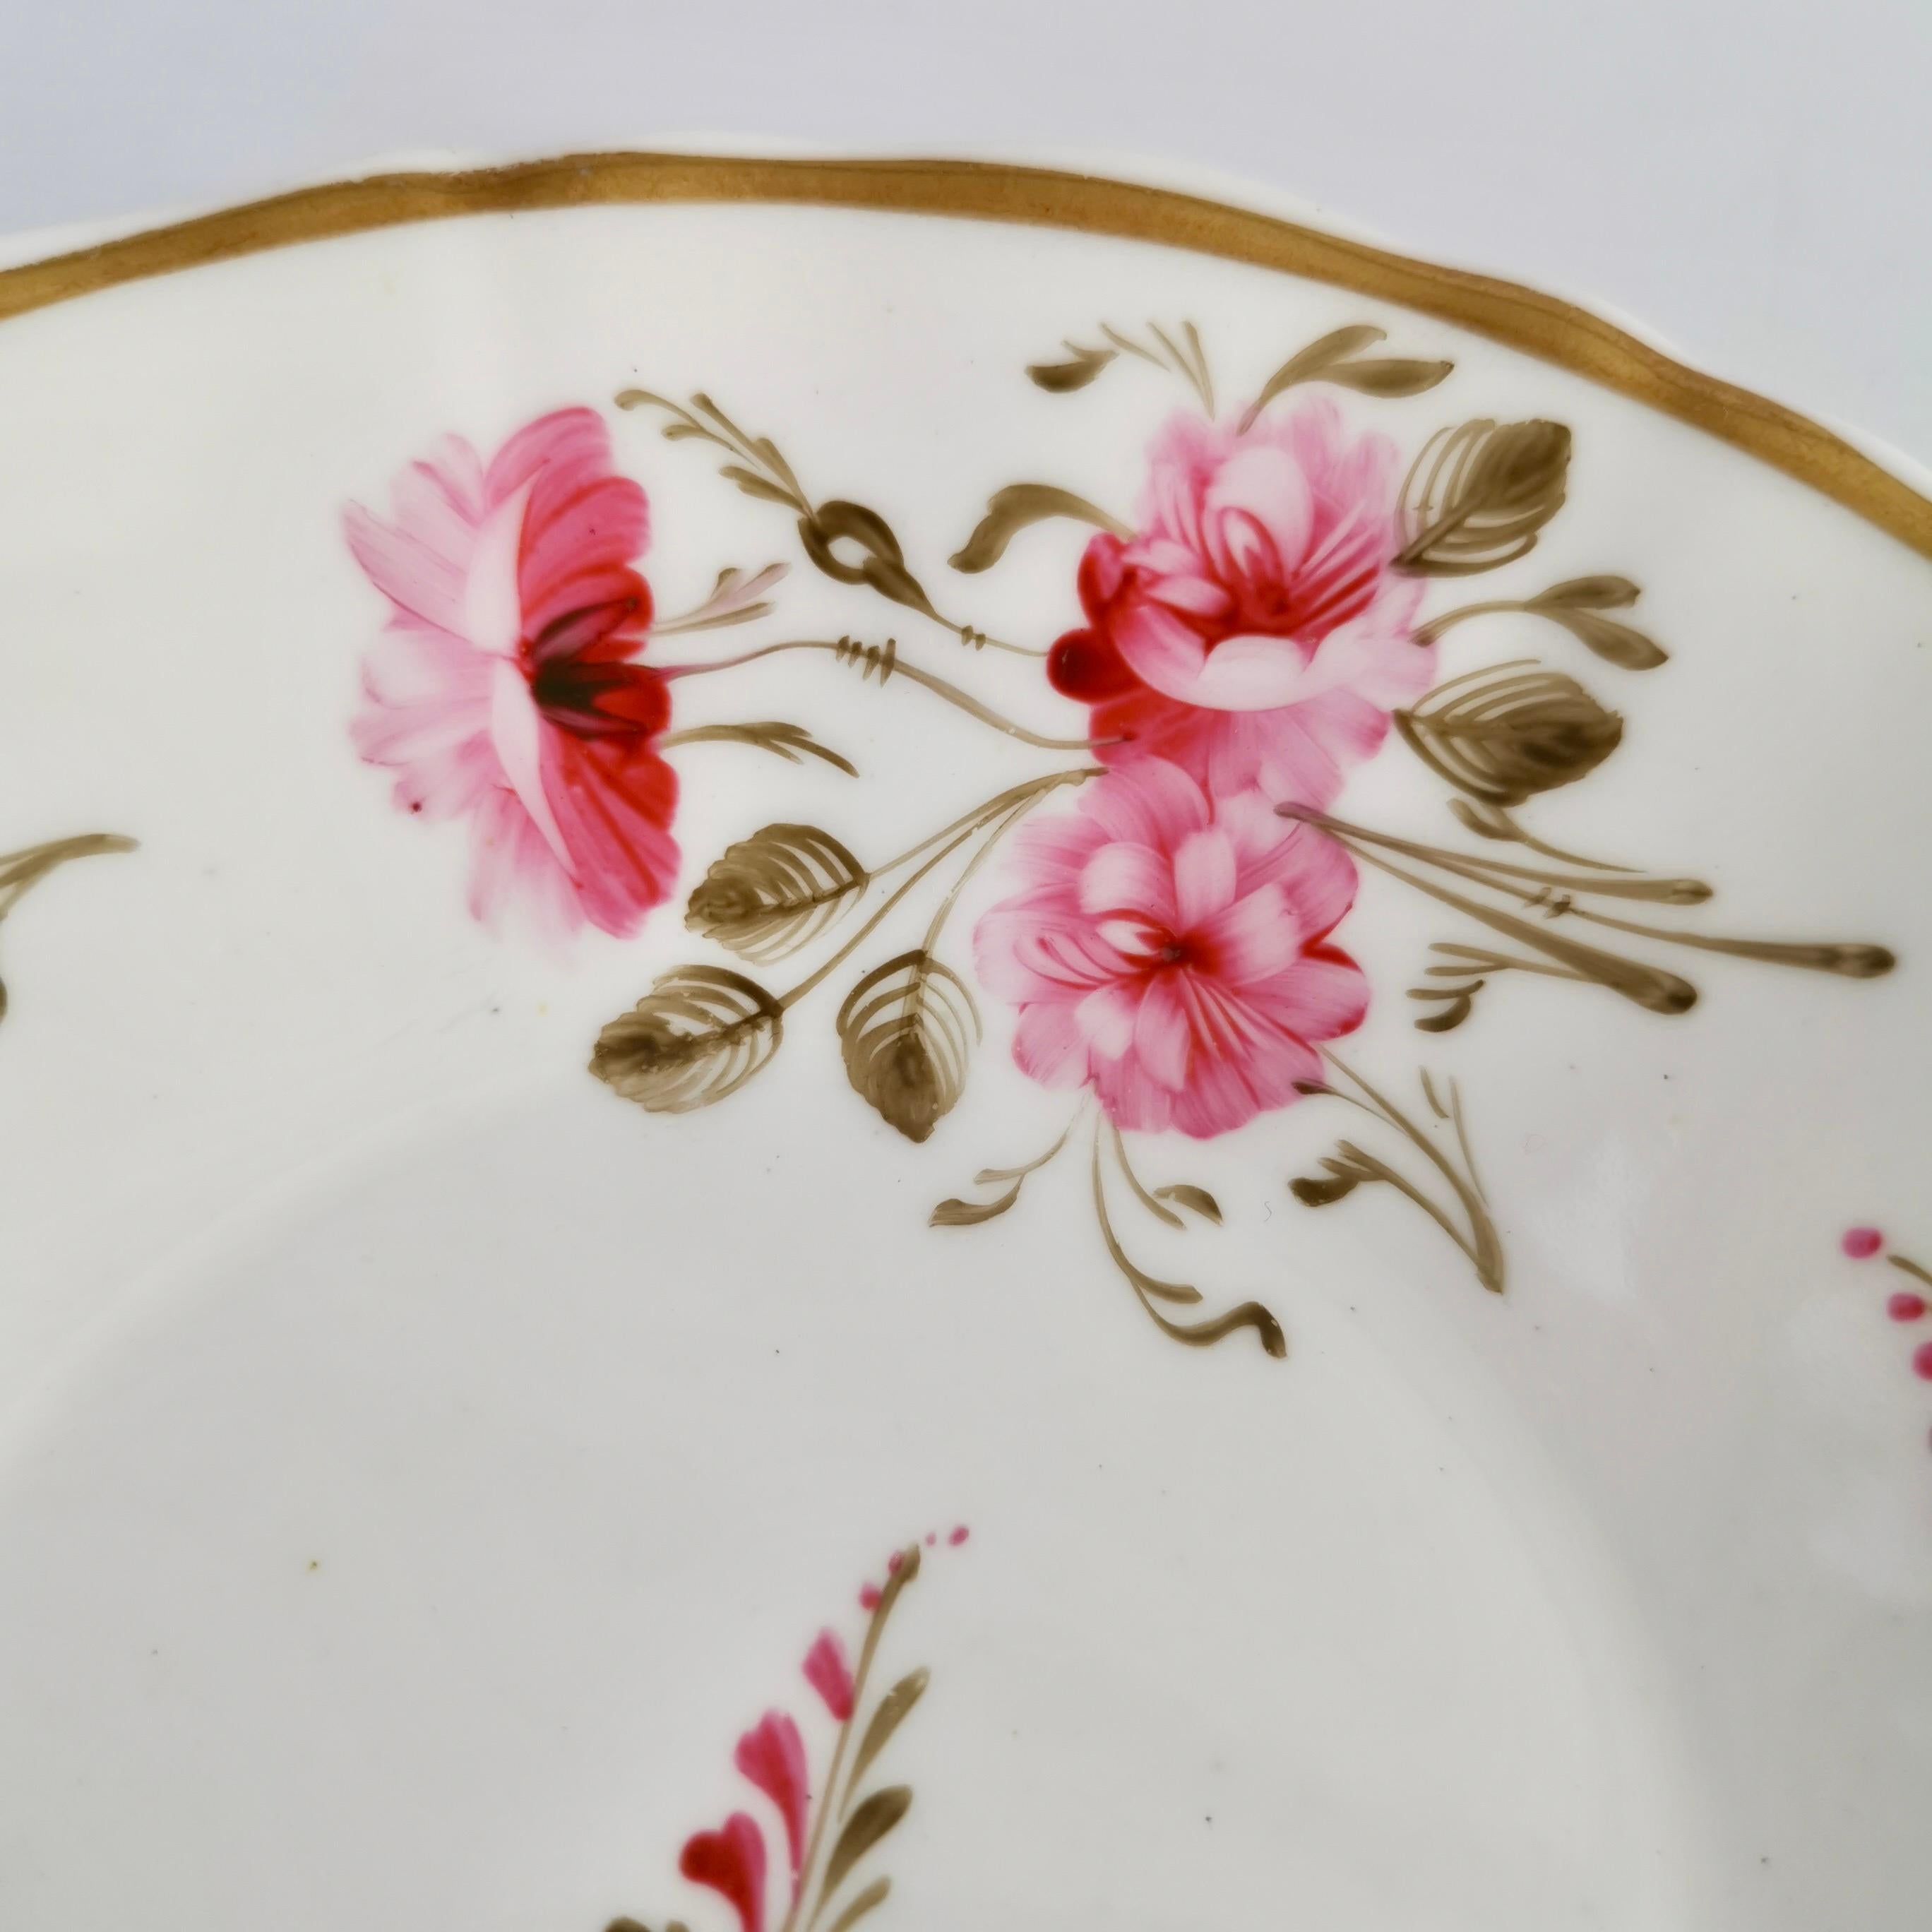 Hand-Painted Ridgway Porcelain Coffee Cup, Pink Roses on White, Regency ca 1825